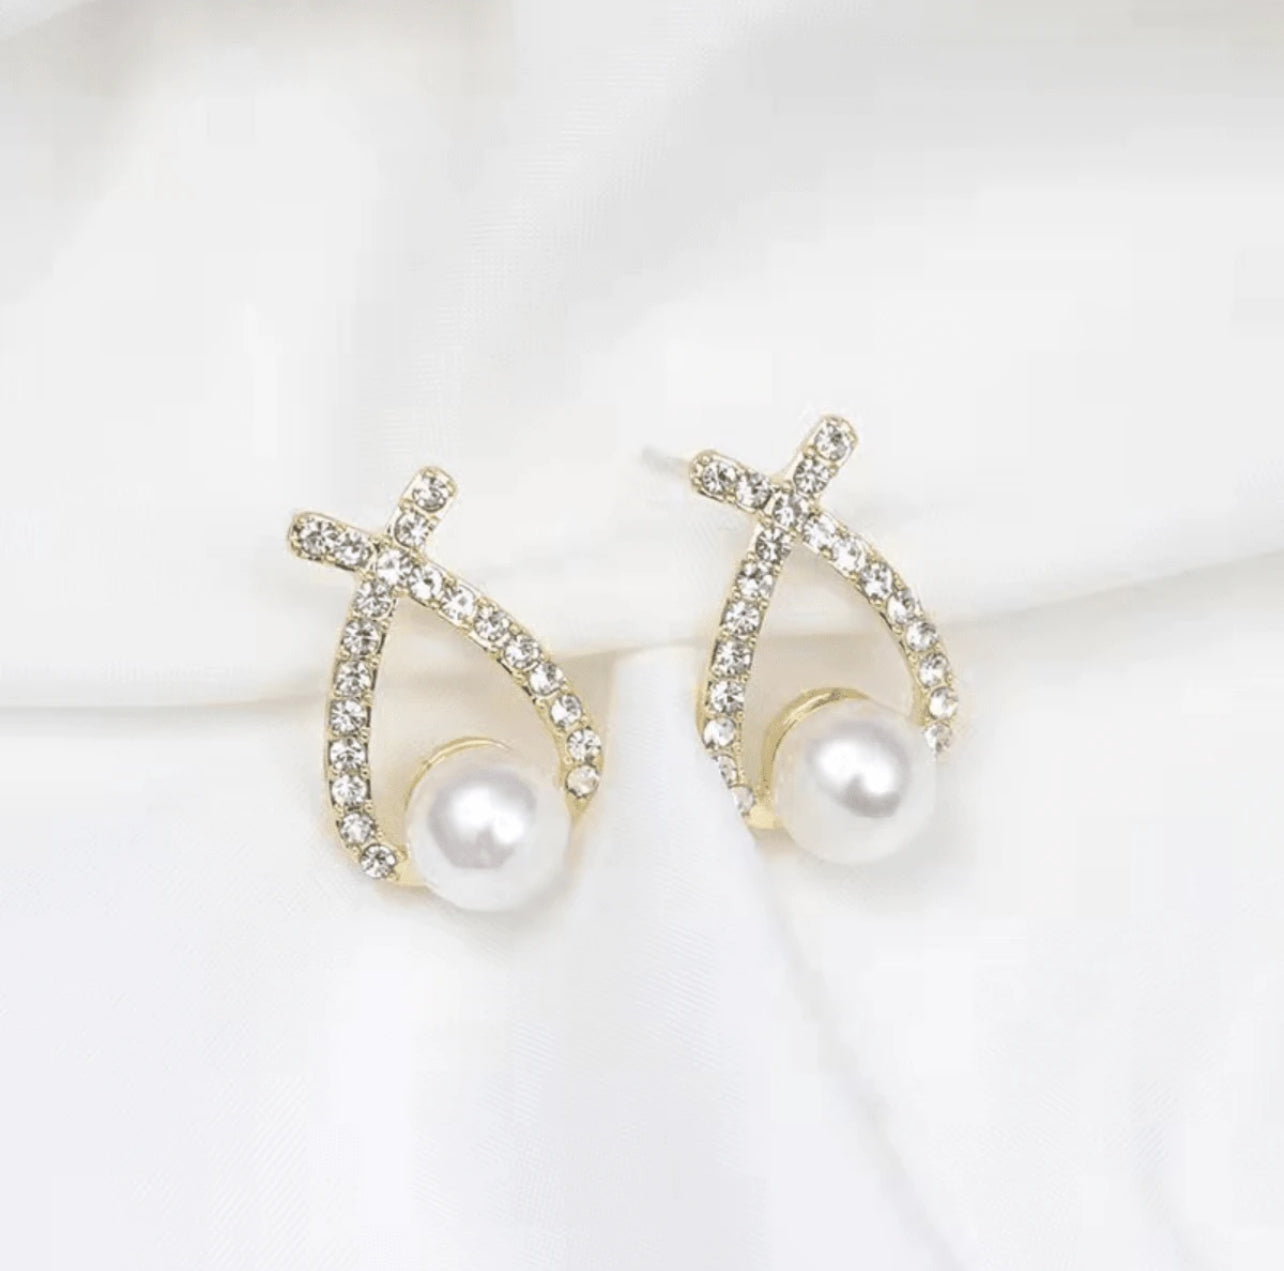 1pc Fashionable & Versatile Earrings With Crossed Pearl Design & Diamond Accents For Women, Elegant & Slimming, Sweet & Delicate Bow Detail Shaped Earrings